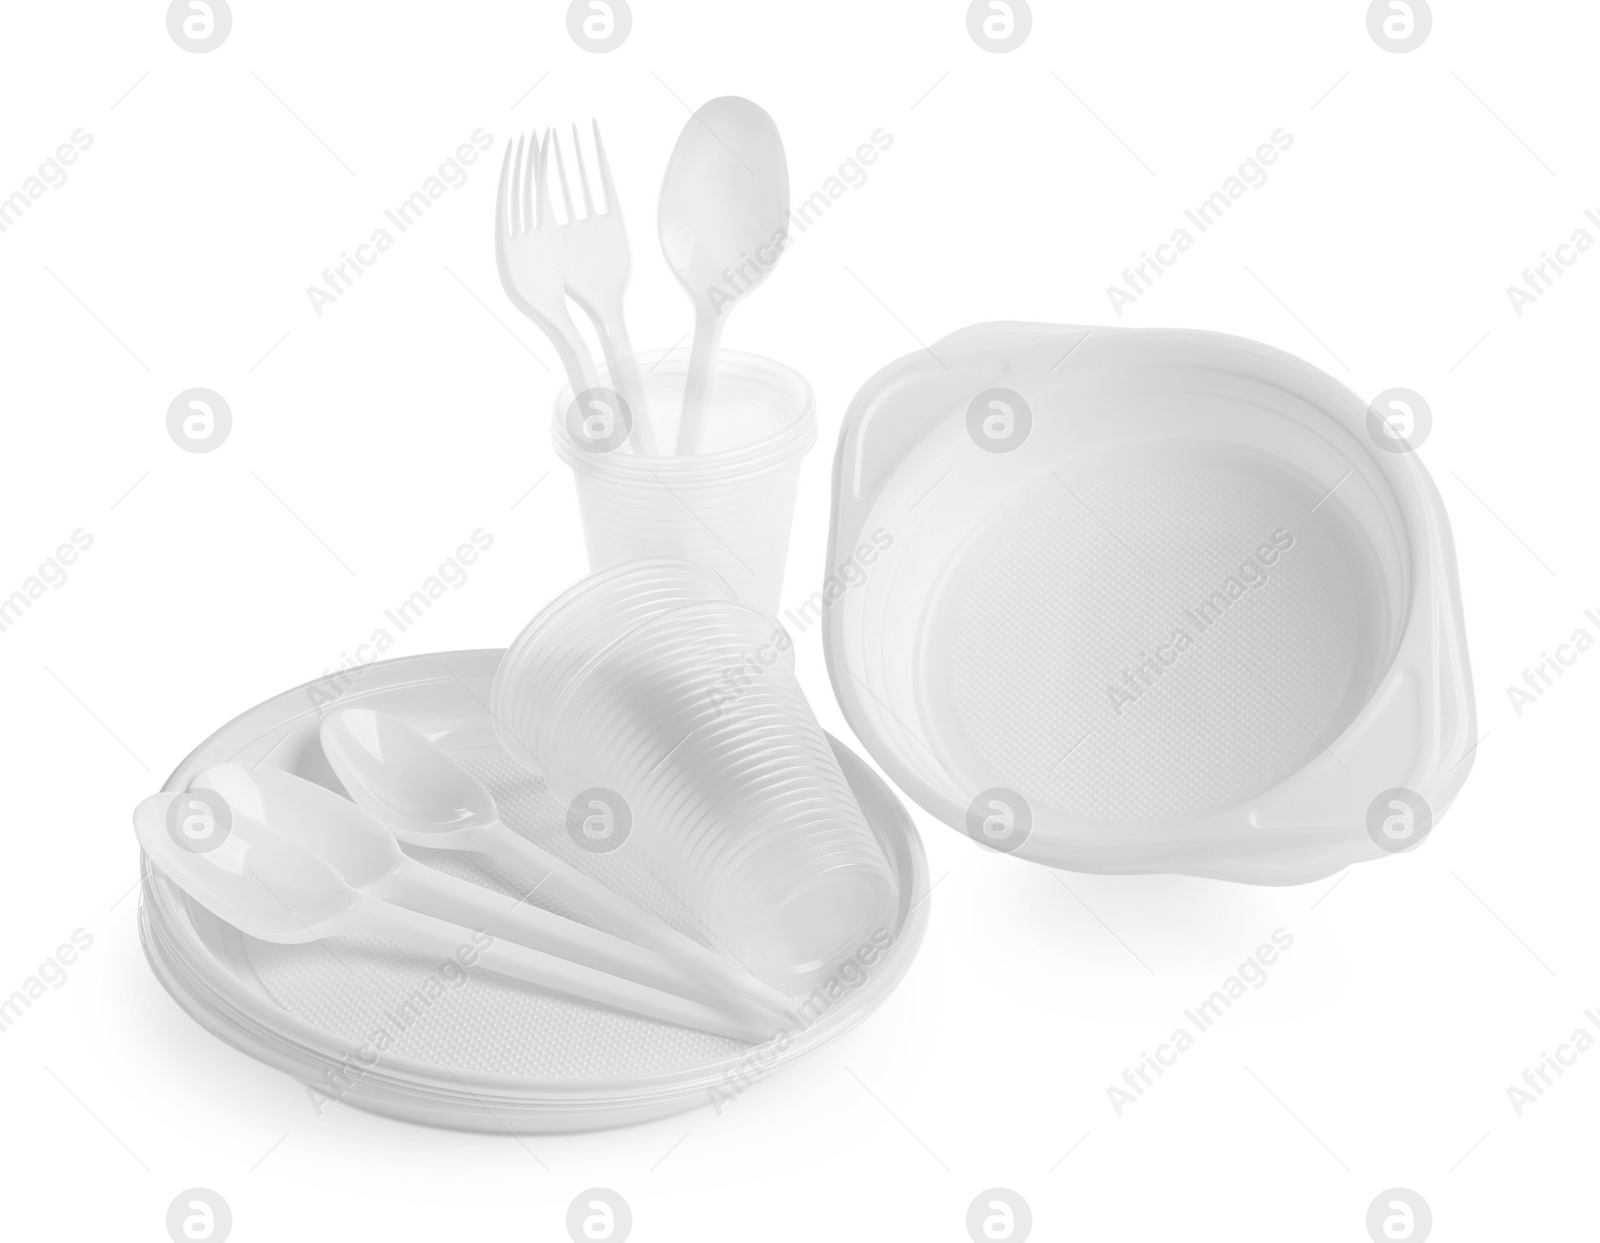 Photo of Set of disposable tableware on white background